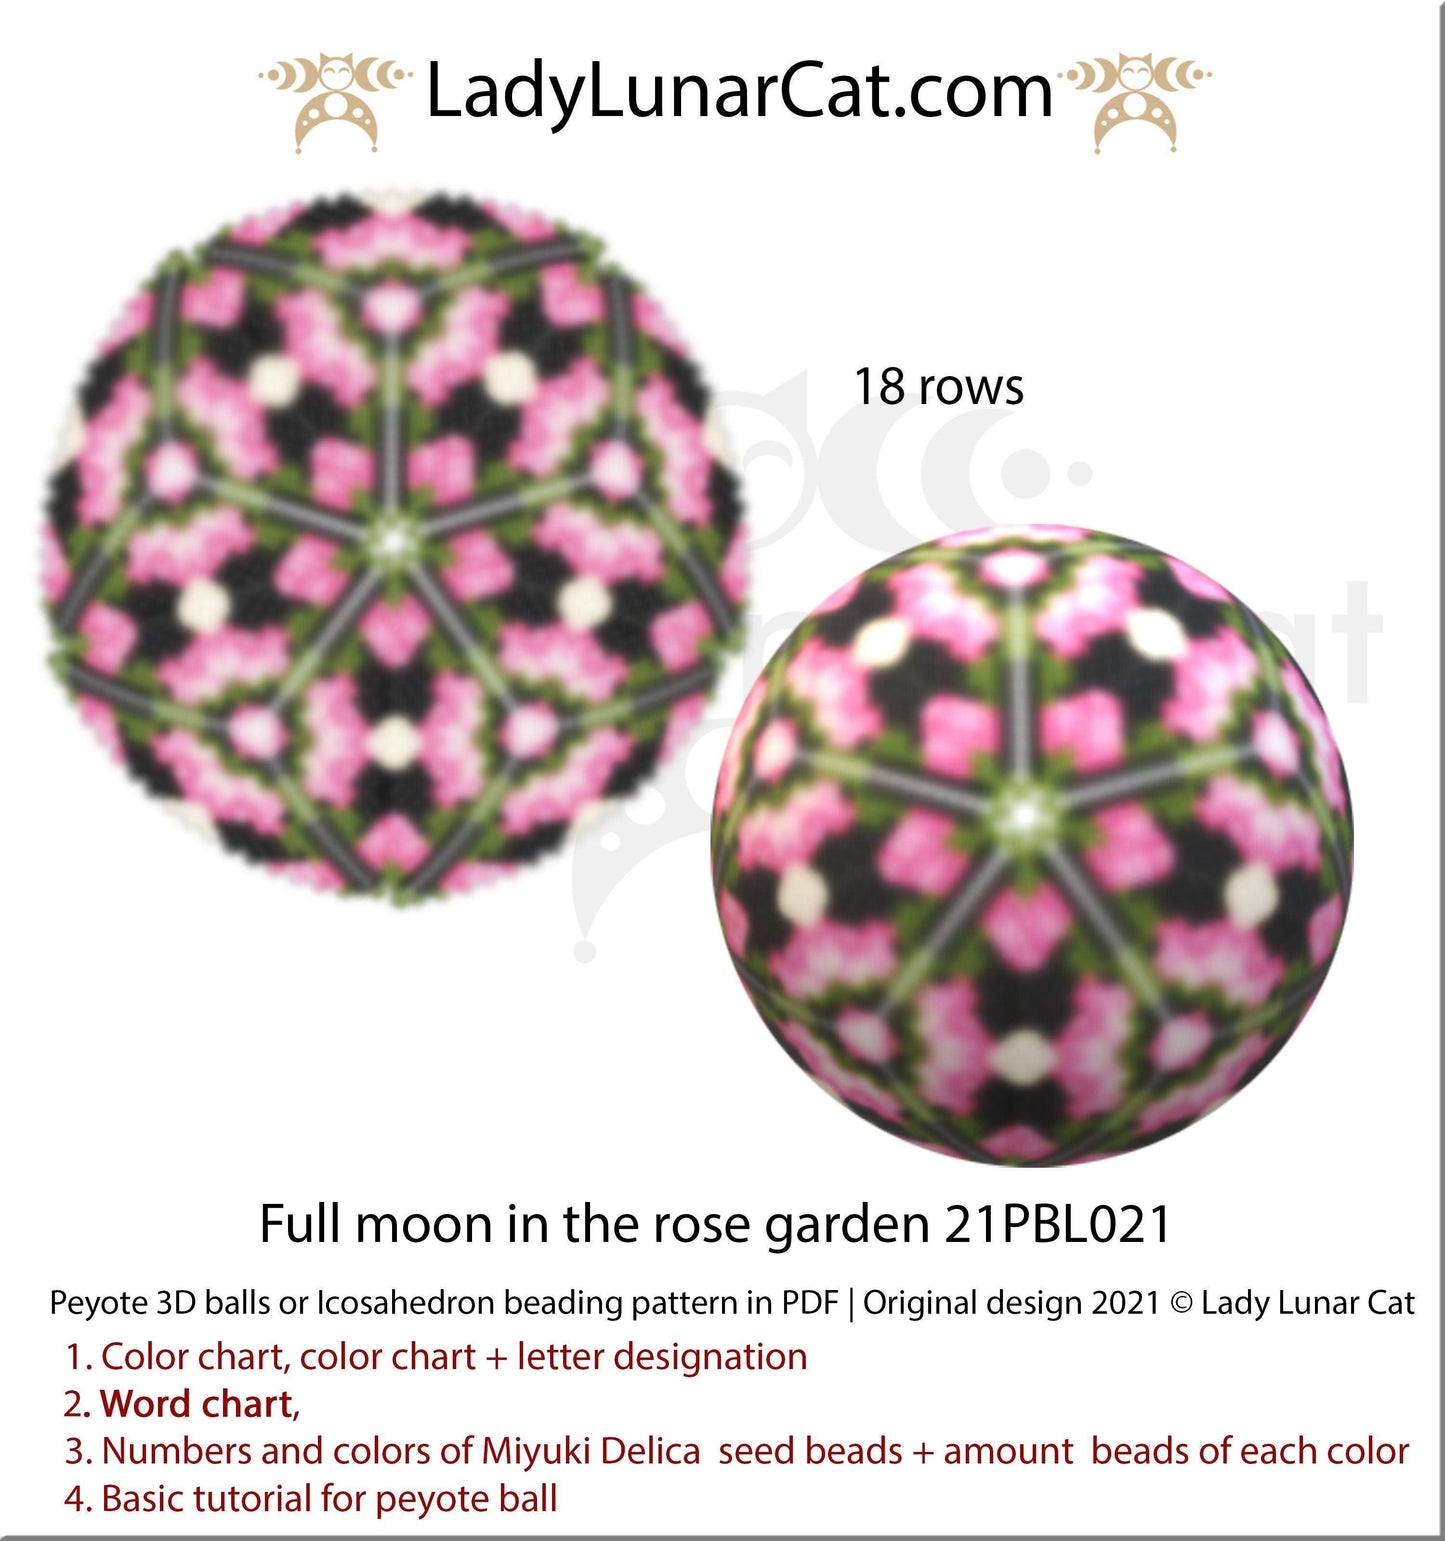 Copy of Beaded ball pattern for beading | Peyote 3d Icosahedron Wild Rose 21PBL019 16 rows LadyLunarCat